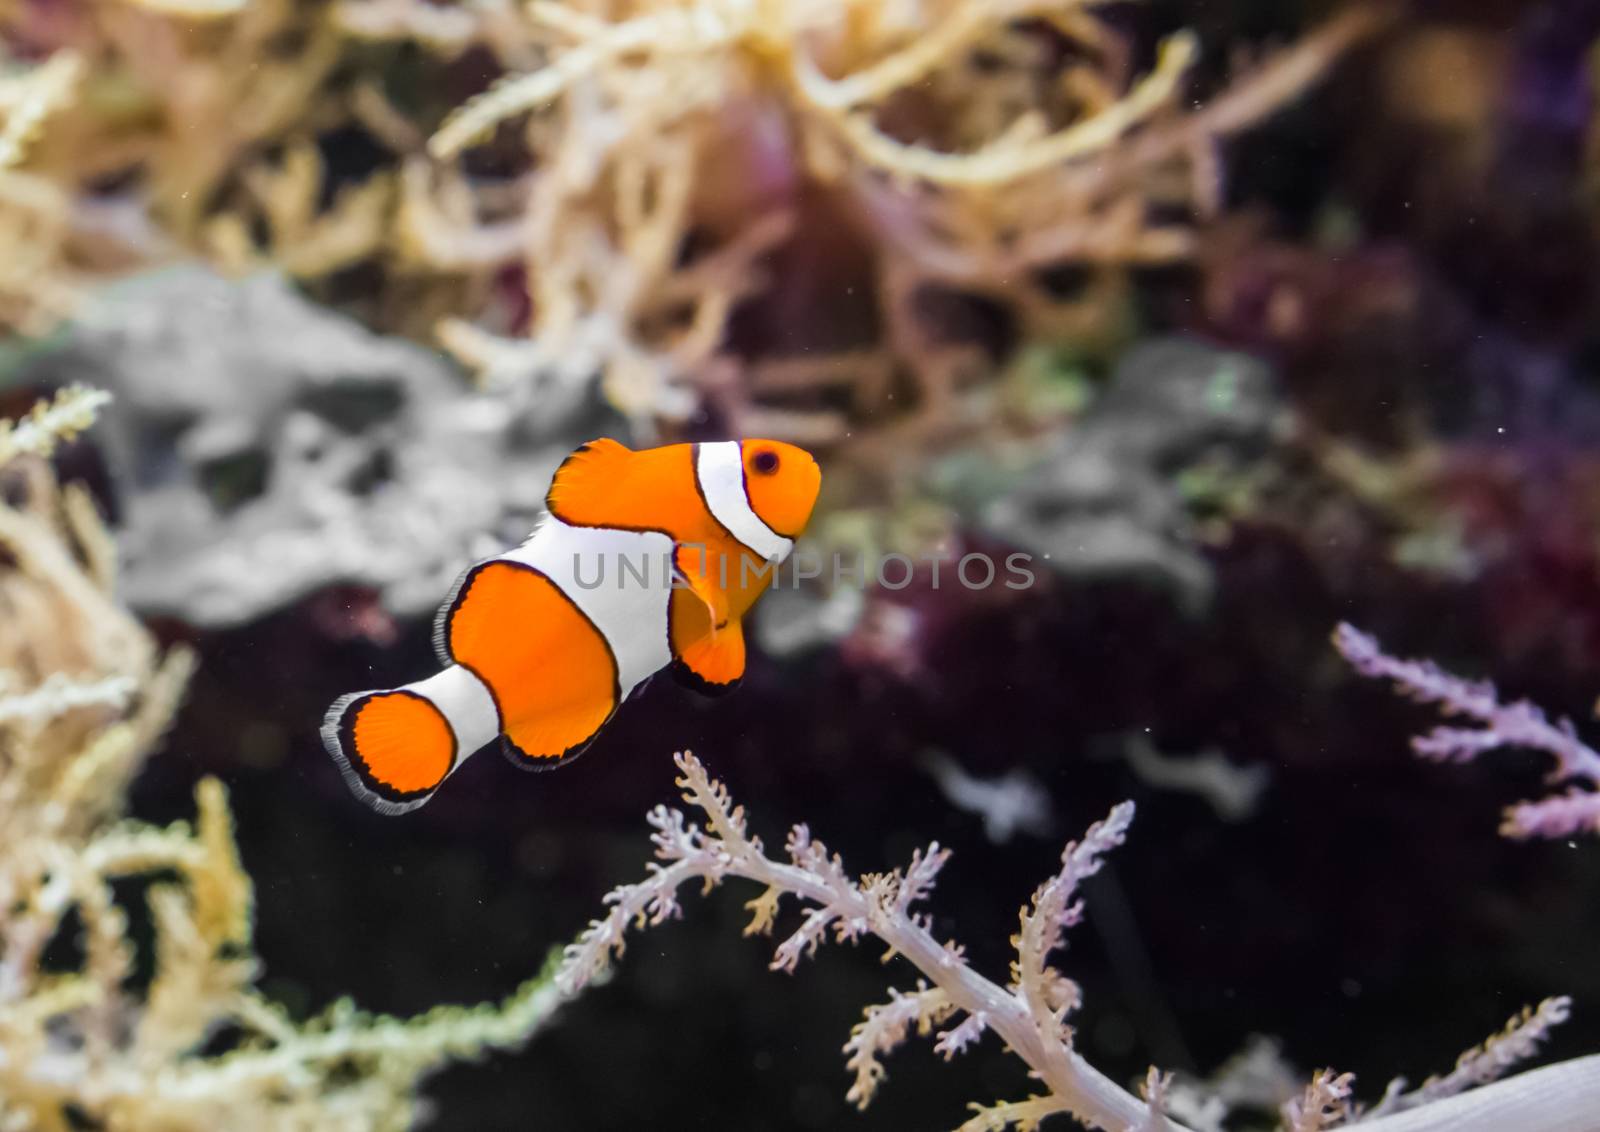 common false percula clownfish also known as clown anemonefish, swimming in the water.